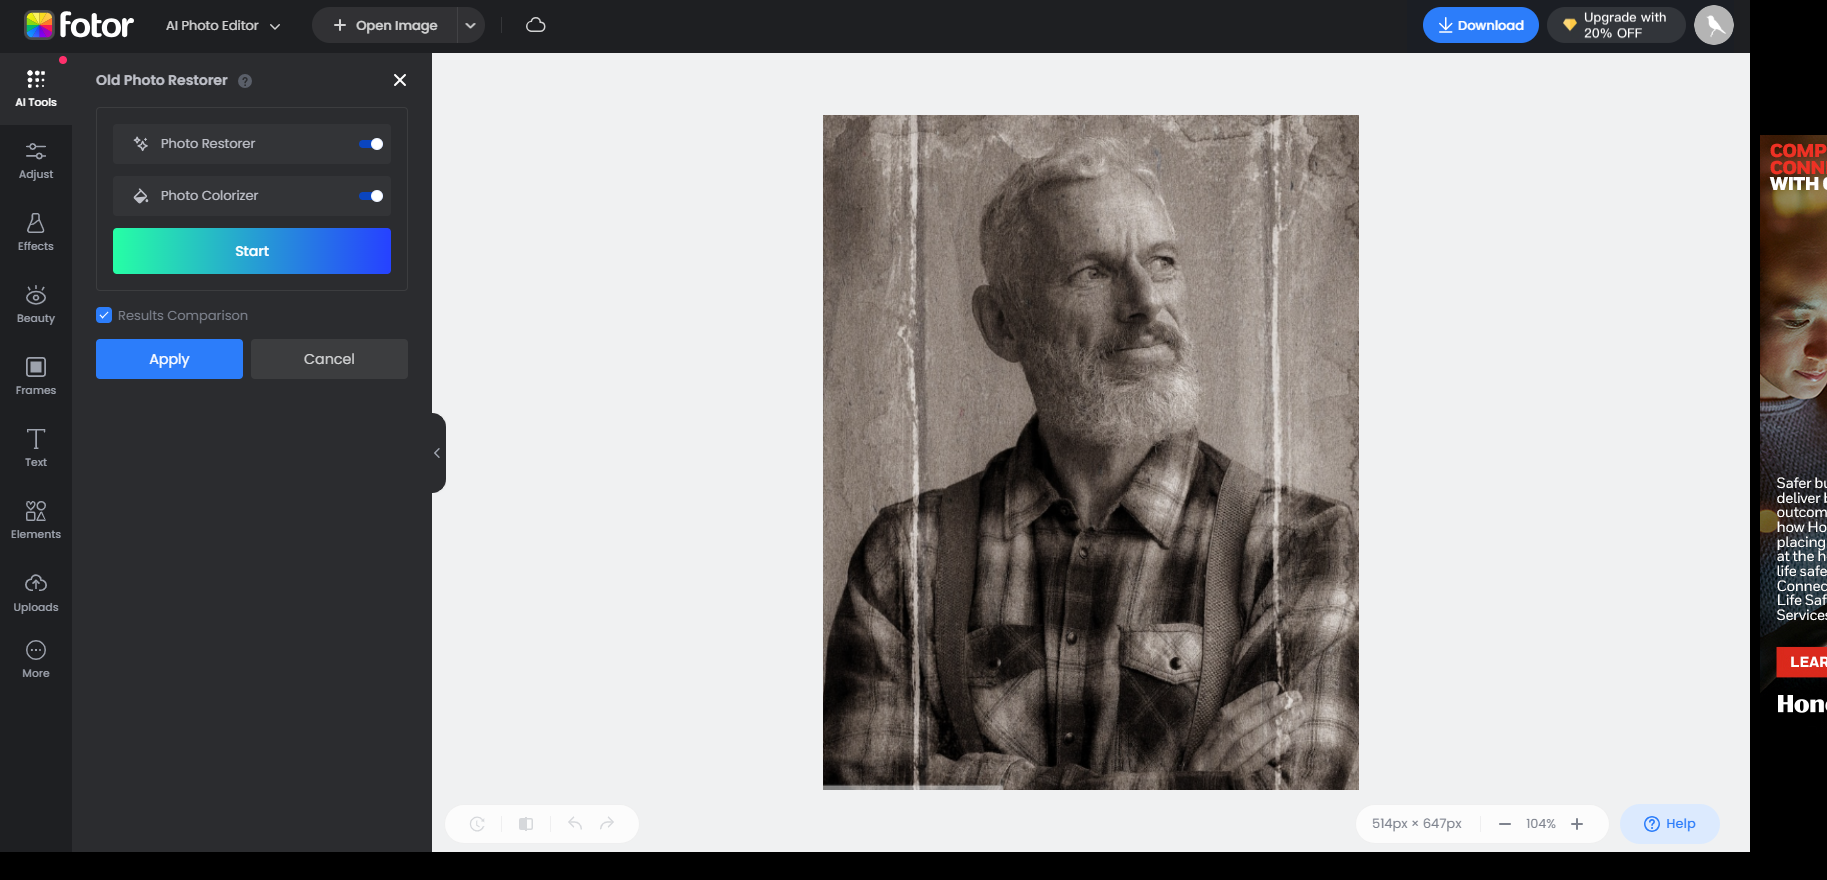 restore your old photos with Fotor's old photo restorer